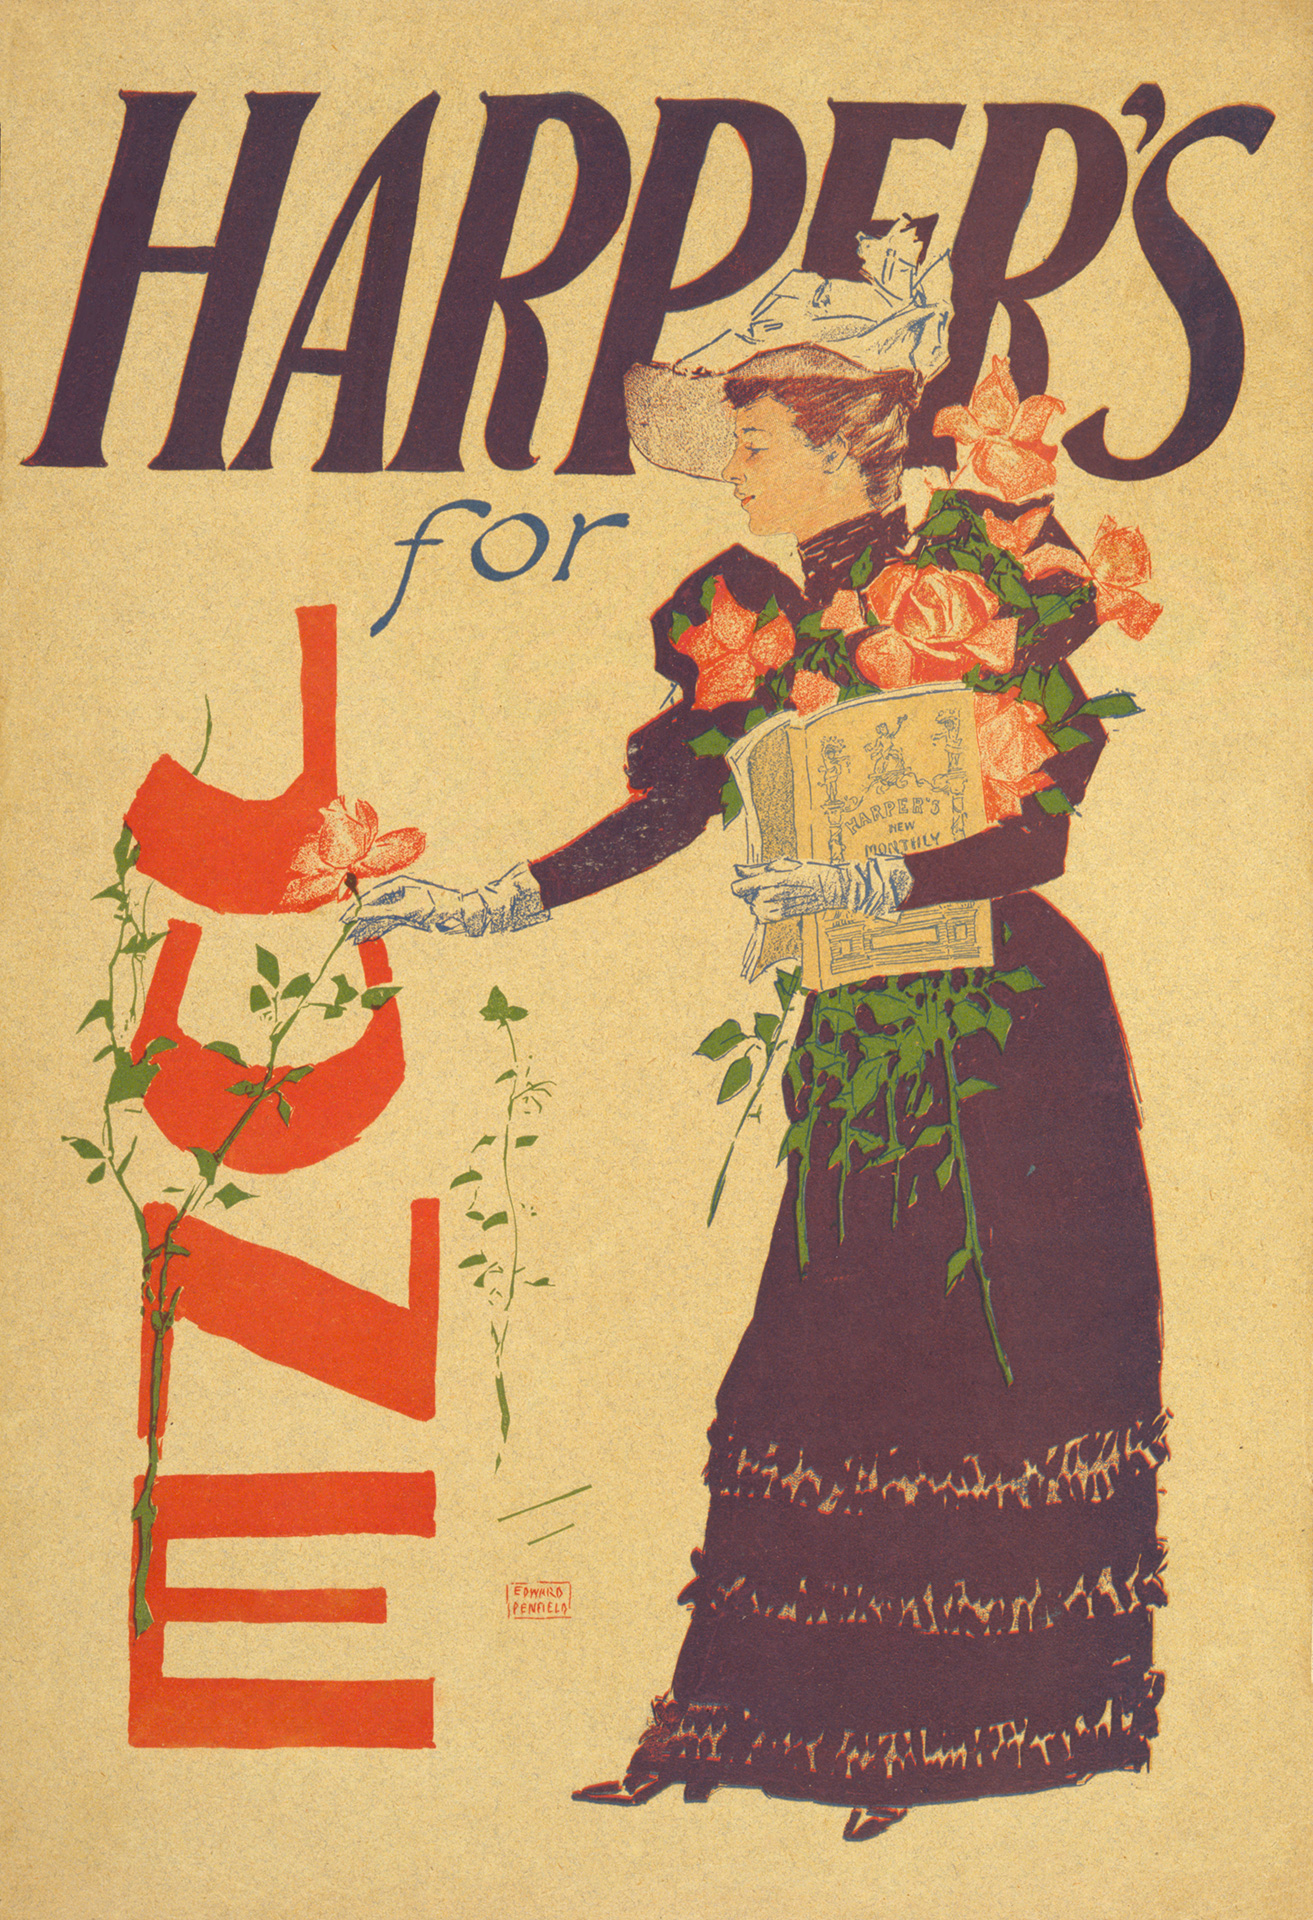 Poster by Edward Penfield for Harper's New Monthly Magazine, June 1893